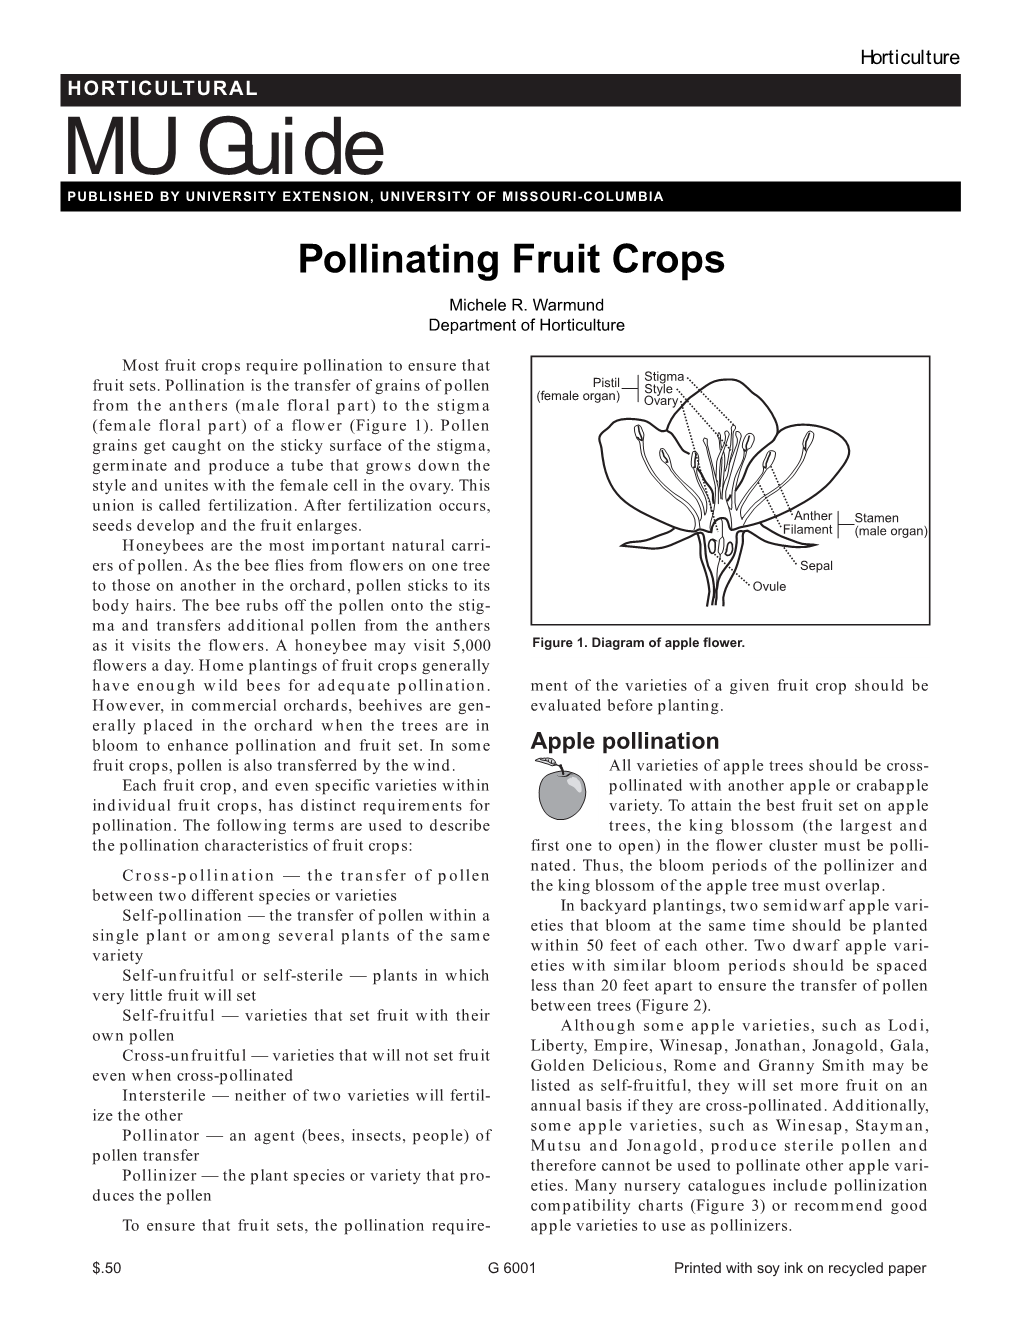 Pollinating Fruit Crops